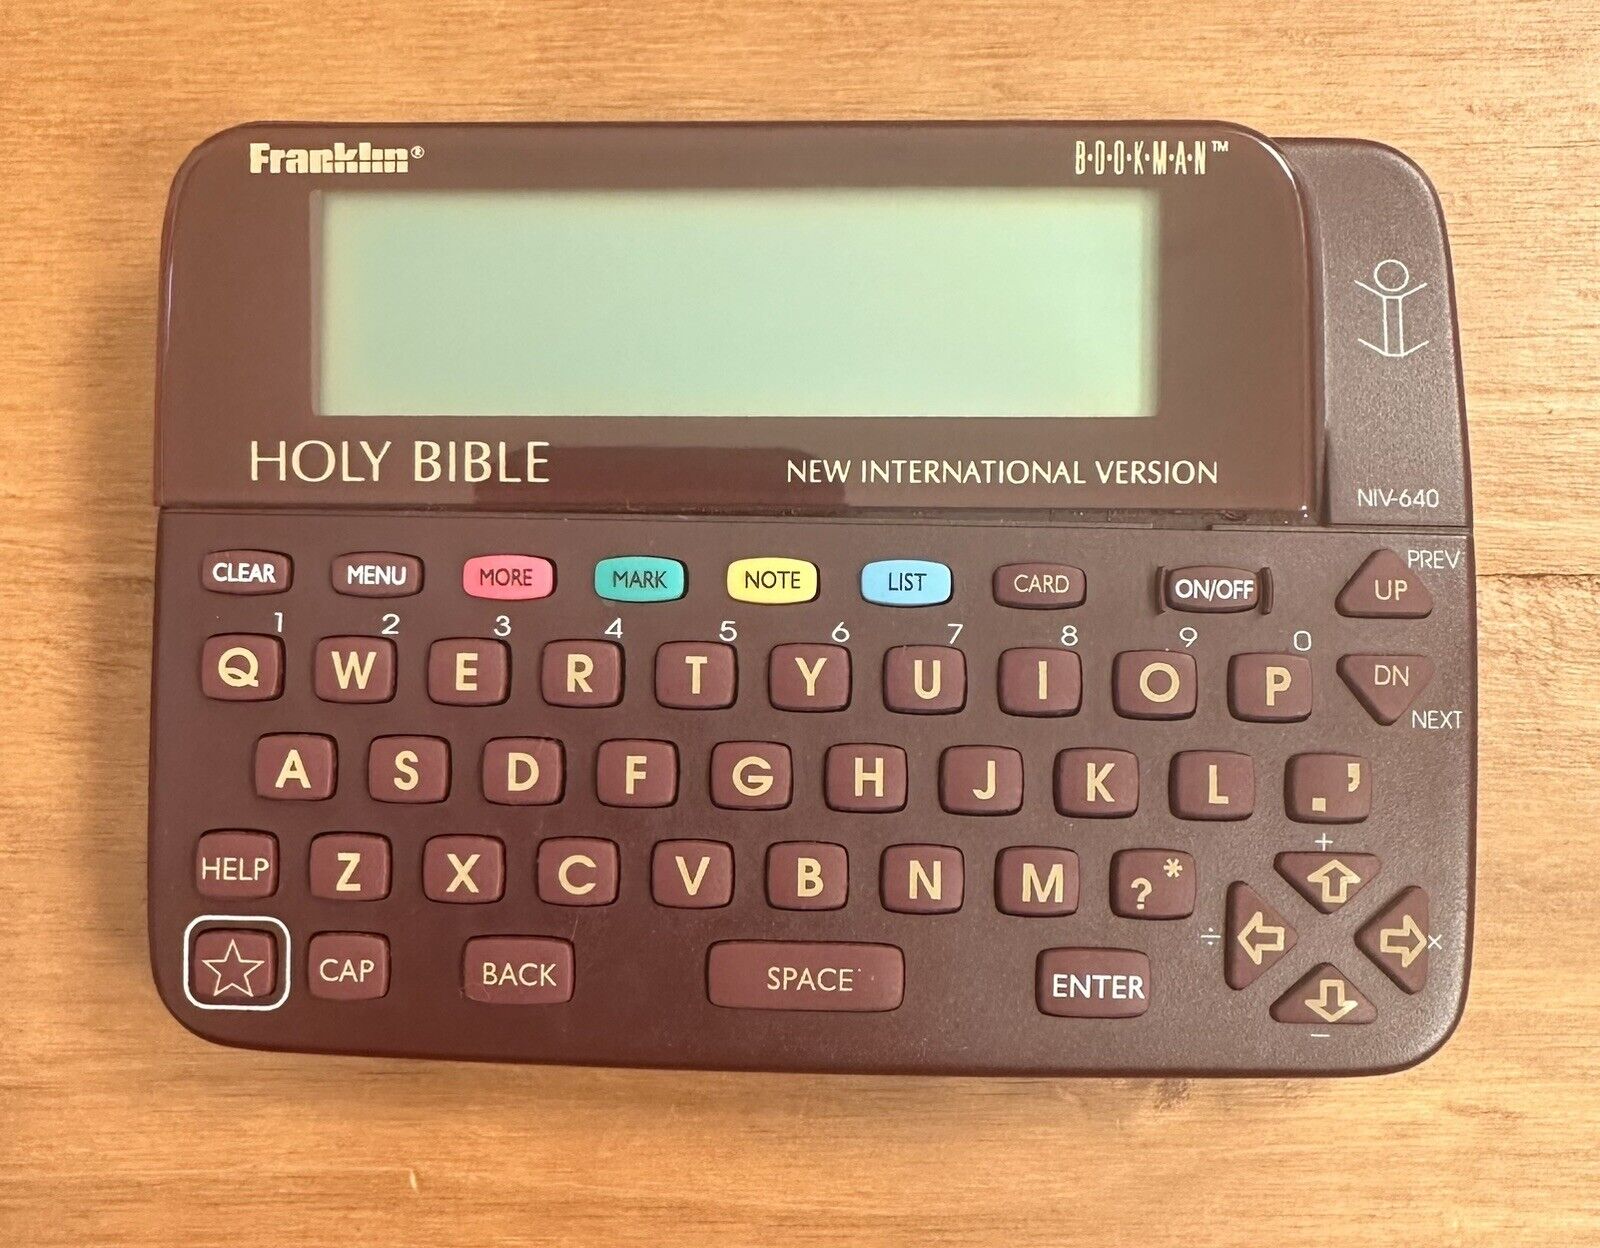 Franklin Bookman NIV-640 Electronic Holy Bible New International Tested/Working